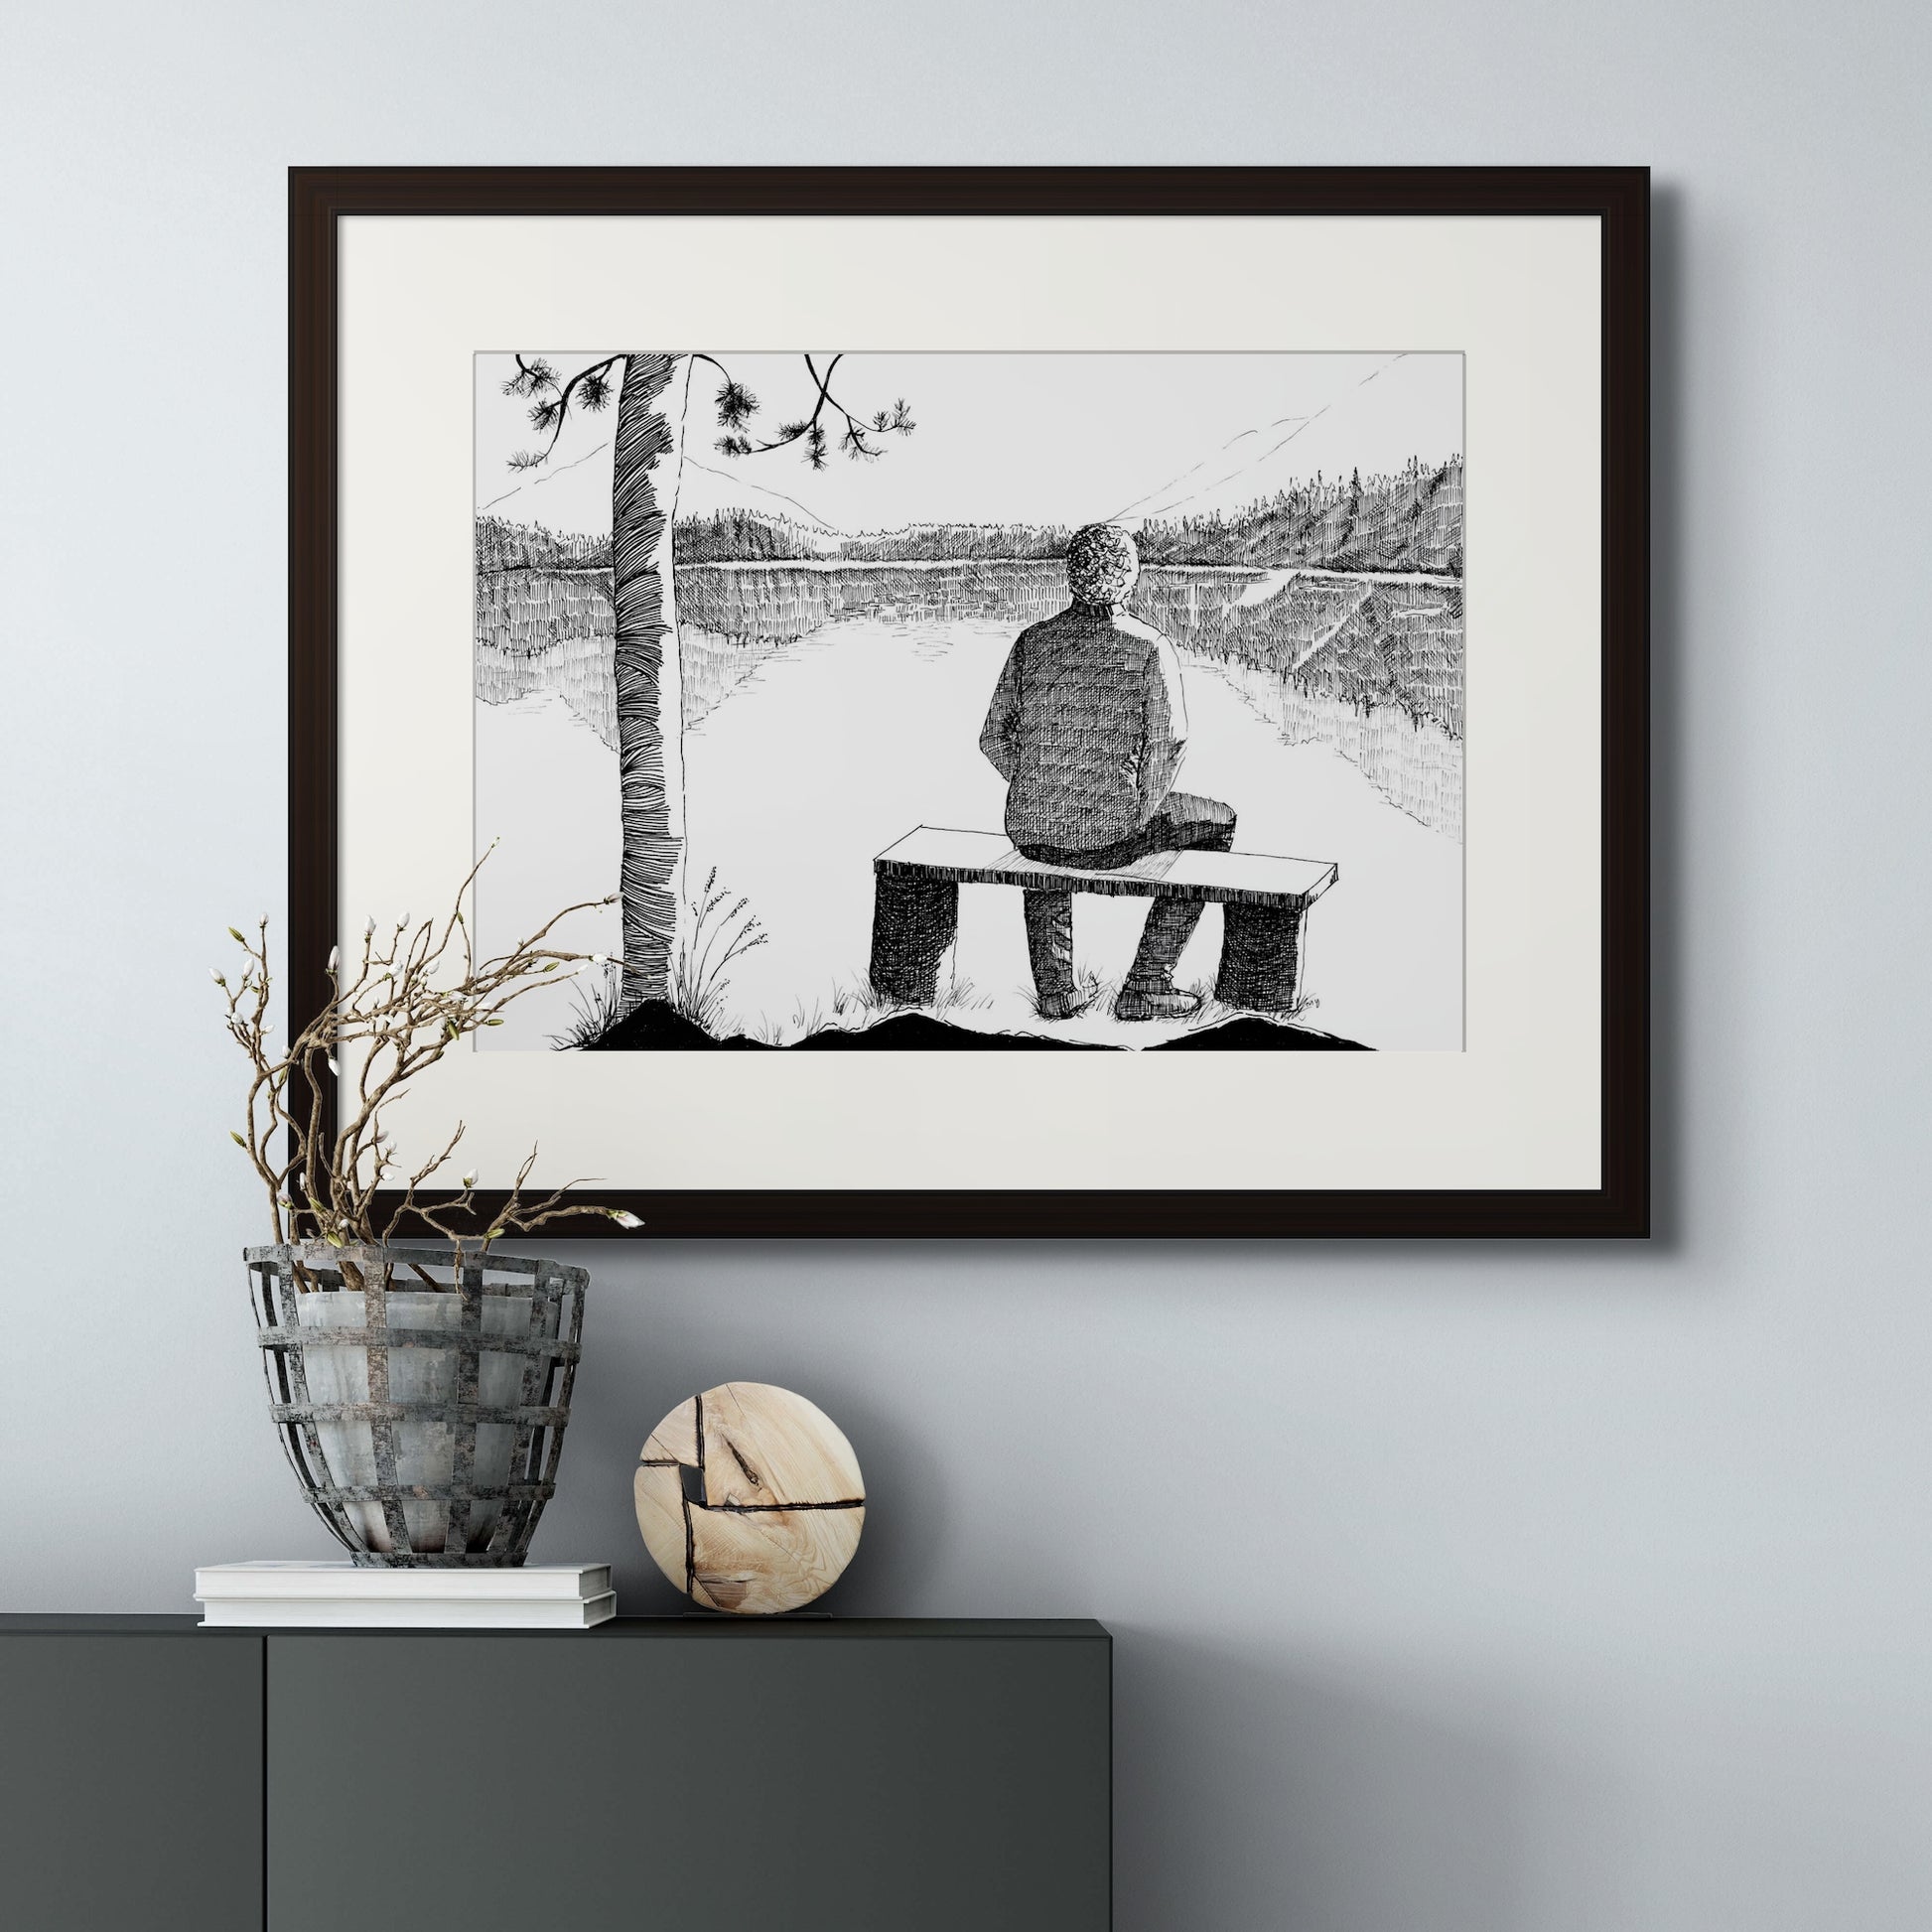 Image: line drawing landscape scenery of lake and mountain with a man seated on a bench. Giclée art print with black frame and cream colour mat.